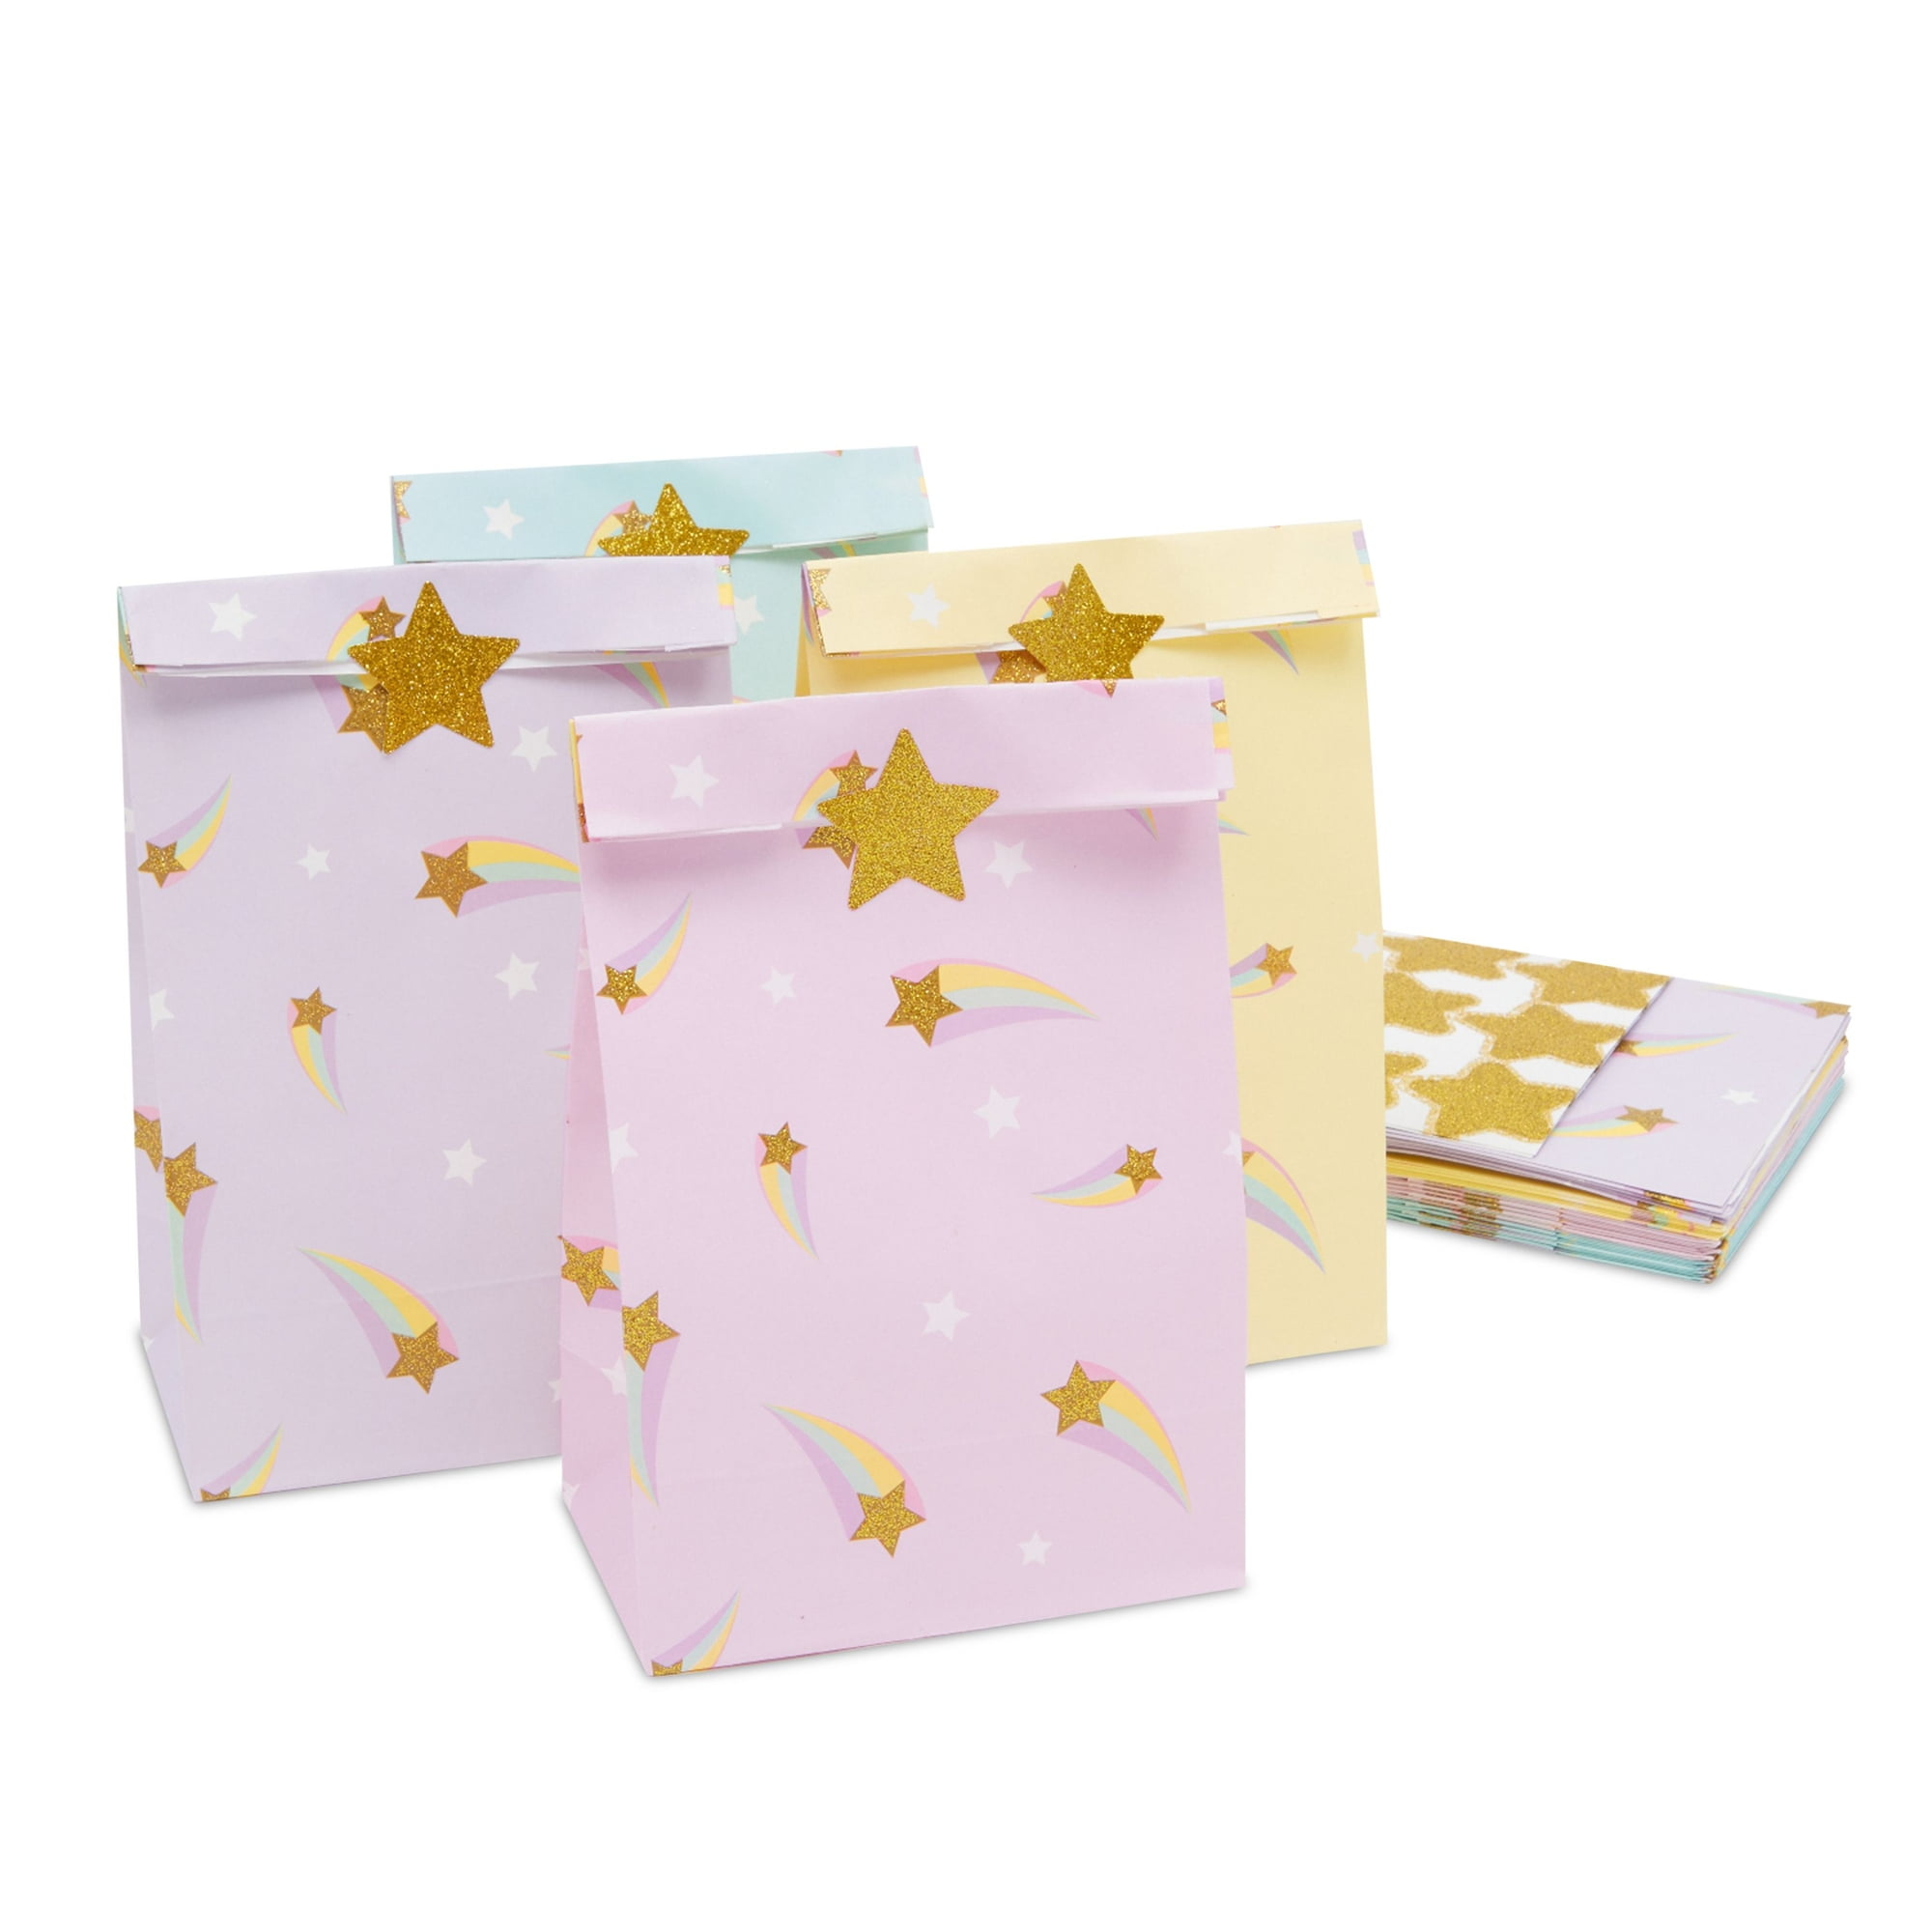 4 1/2 x 5 3/4 Small Gold Star Gift Bags with Tags - 12 Pc.